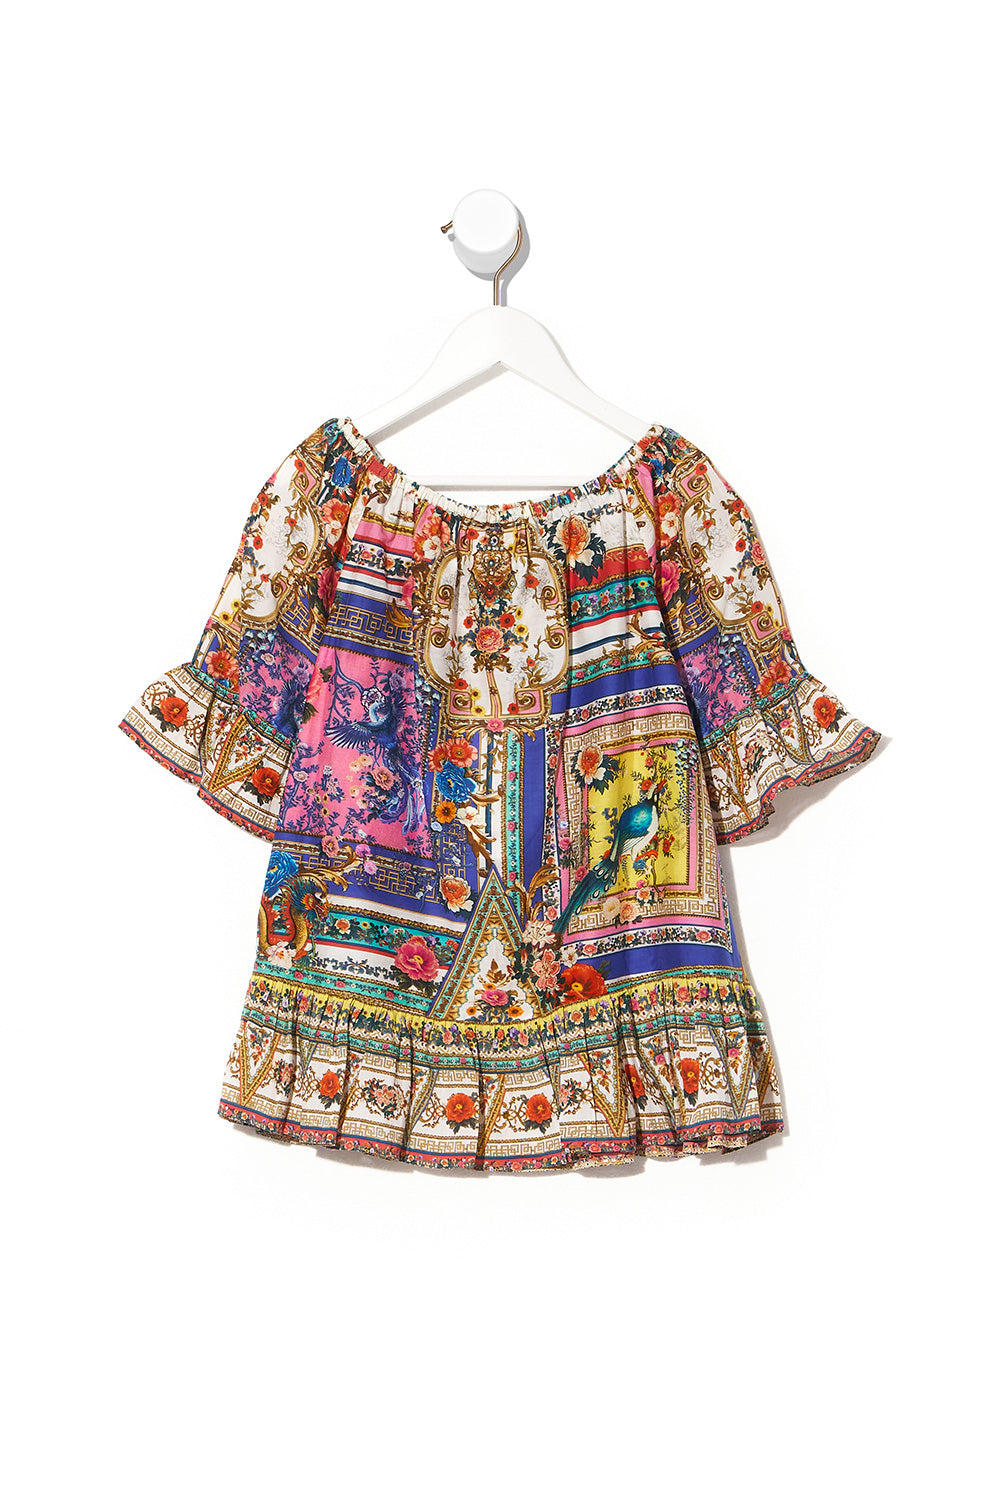 KIDS A-LINE FRILL DRESS 12-14 PARTY IN THE PALACE